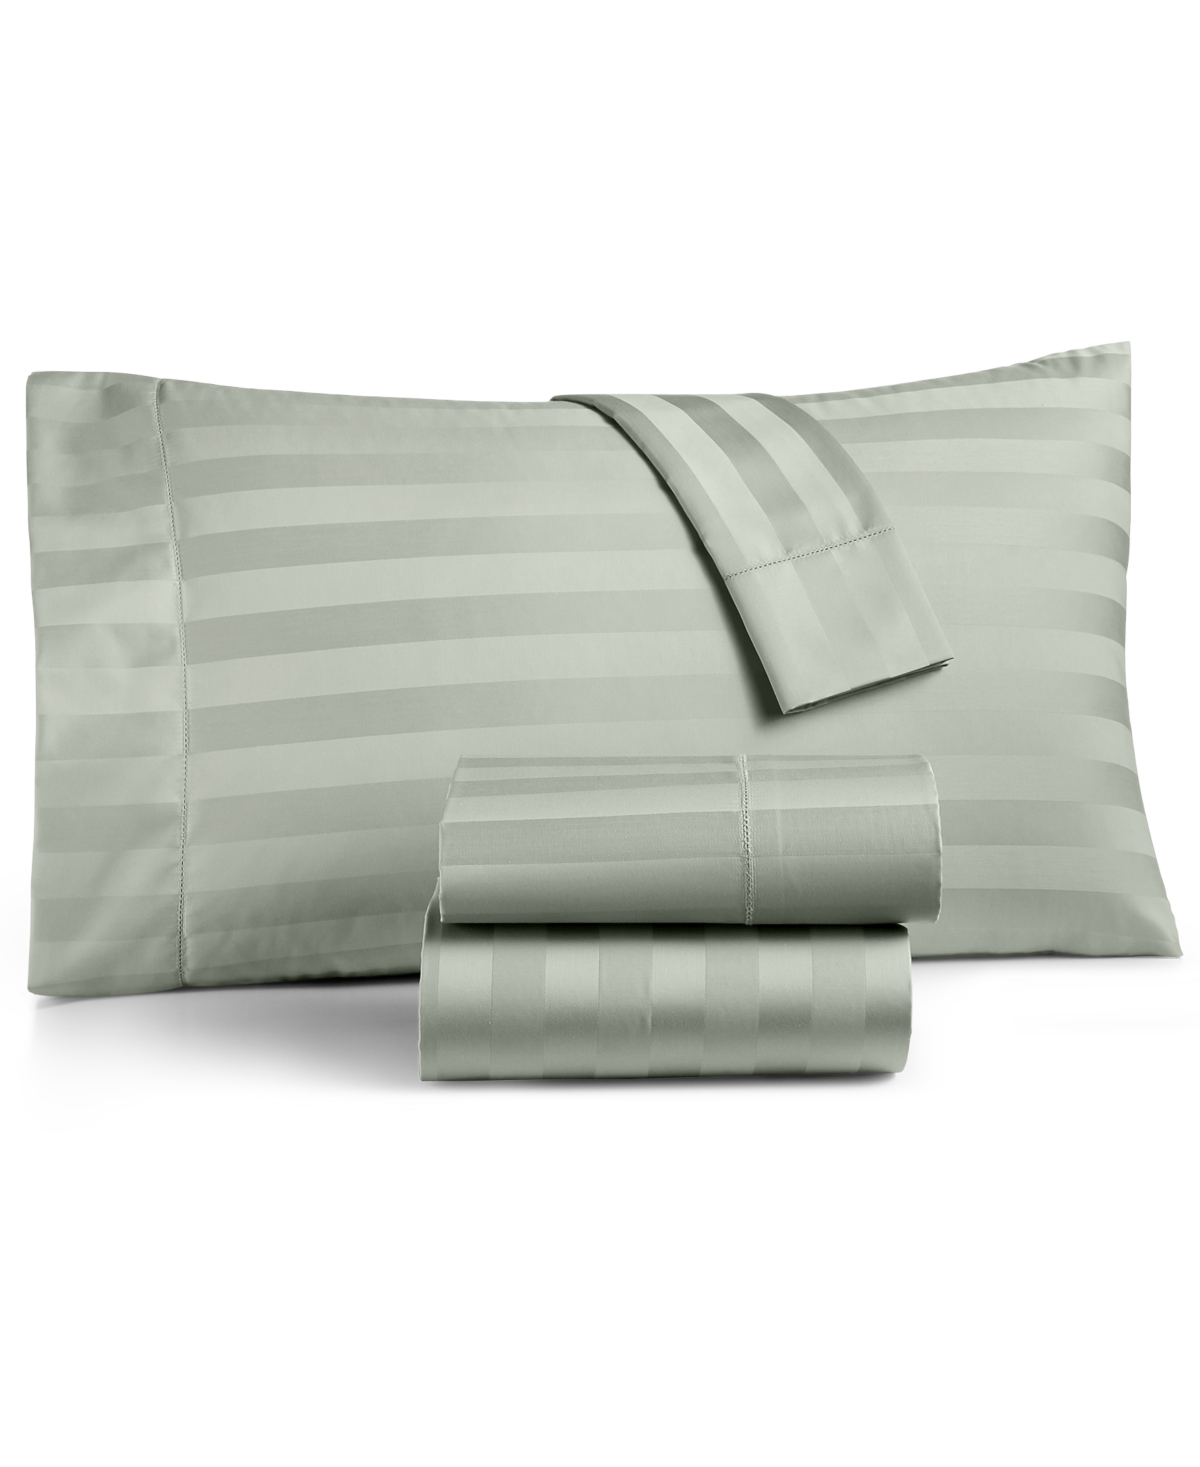 Charter Club Damask 1.5" Stripe 550 Thread Count 100% Cotton 4-pc. Sheet Set, California King, Created For Macy's In Glacier